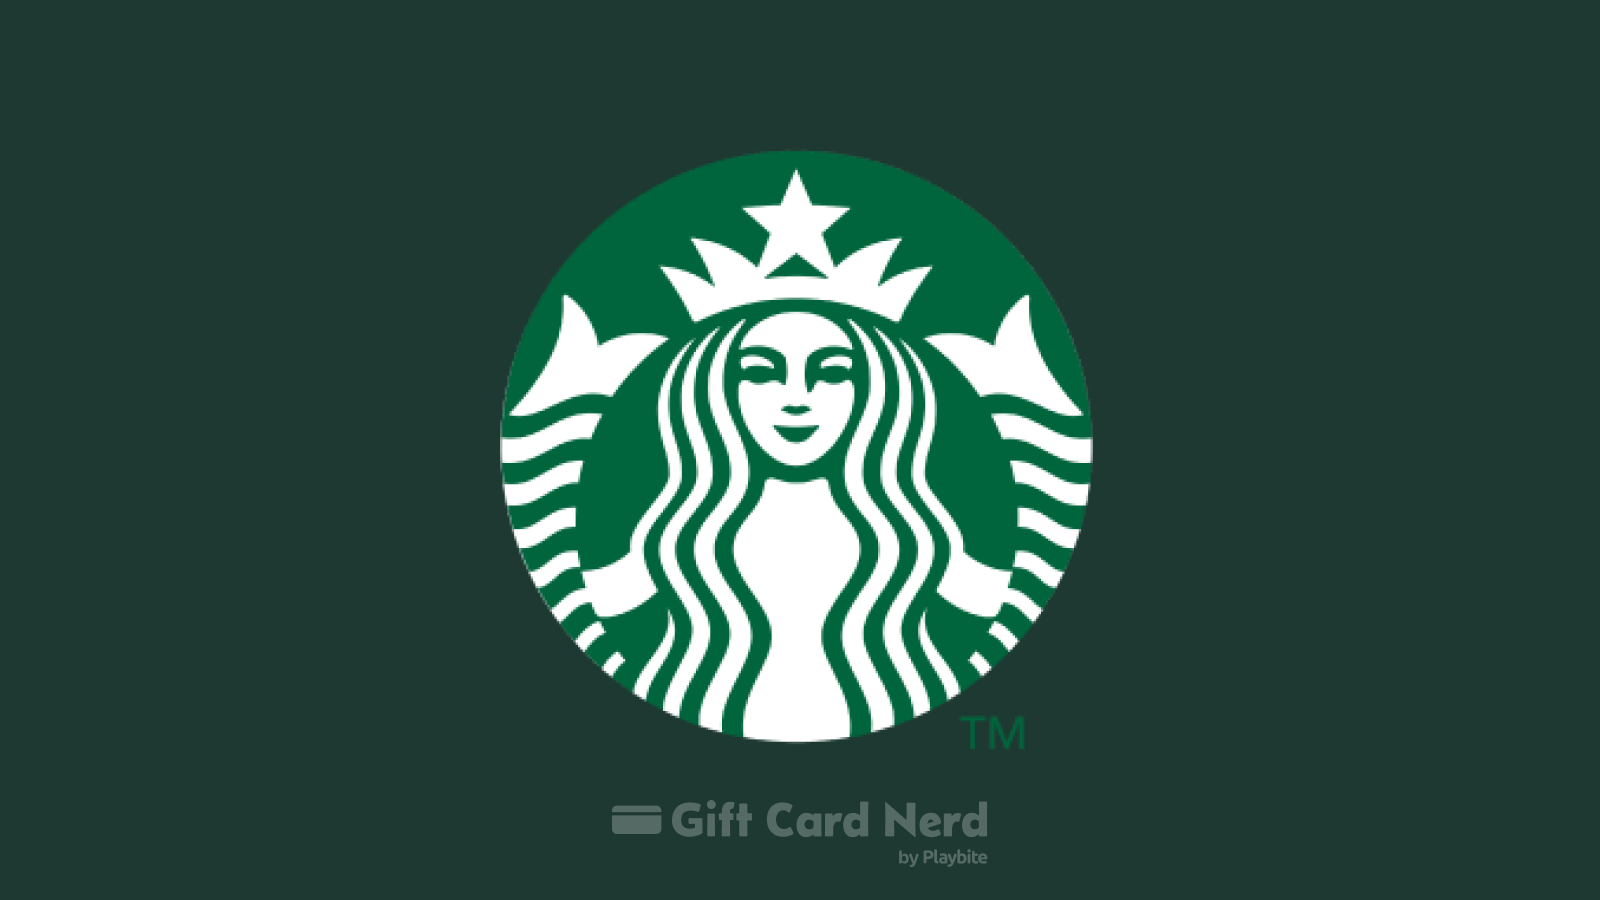 Does Target Sell Starbucks Gift Cards?